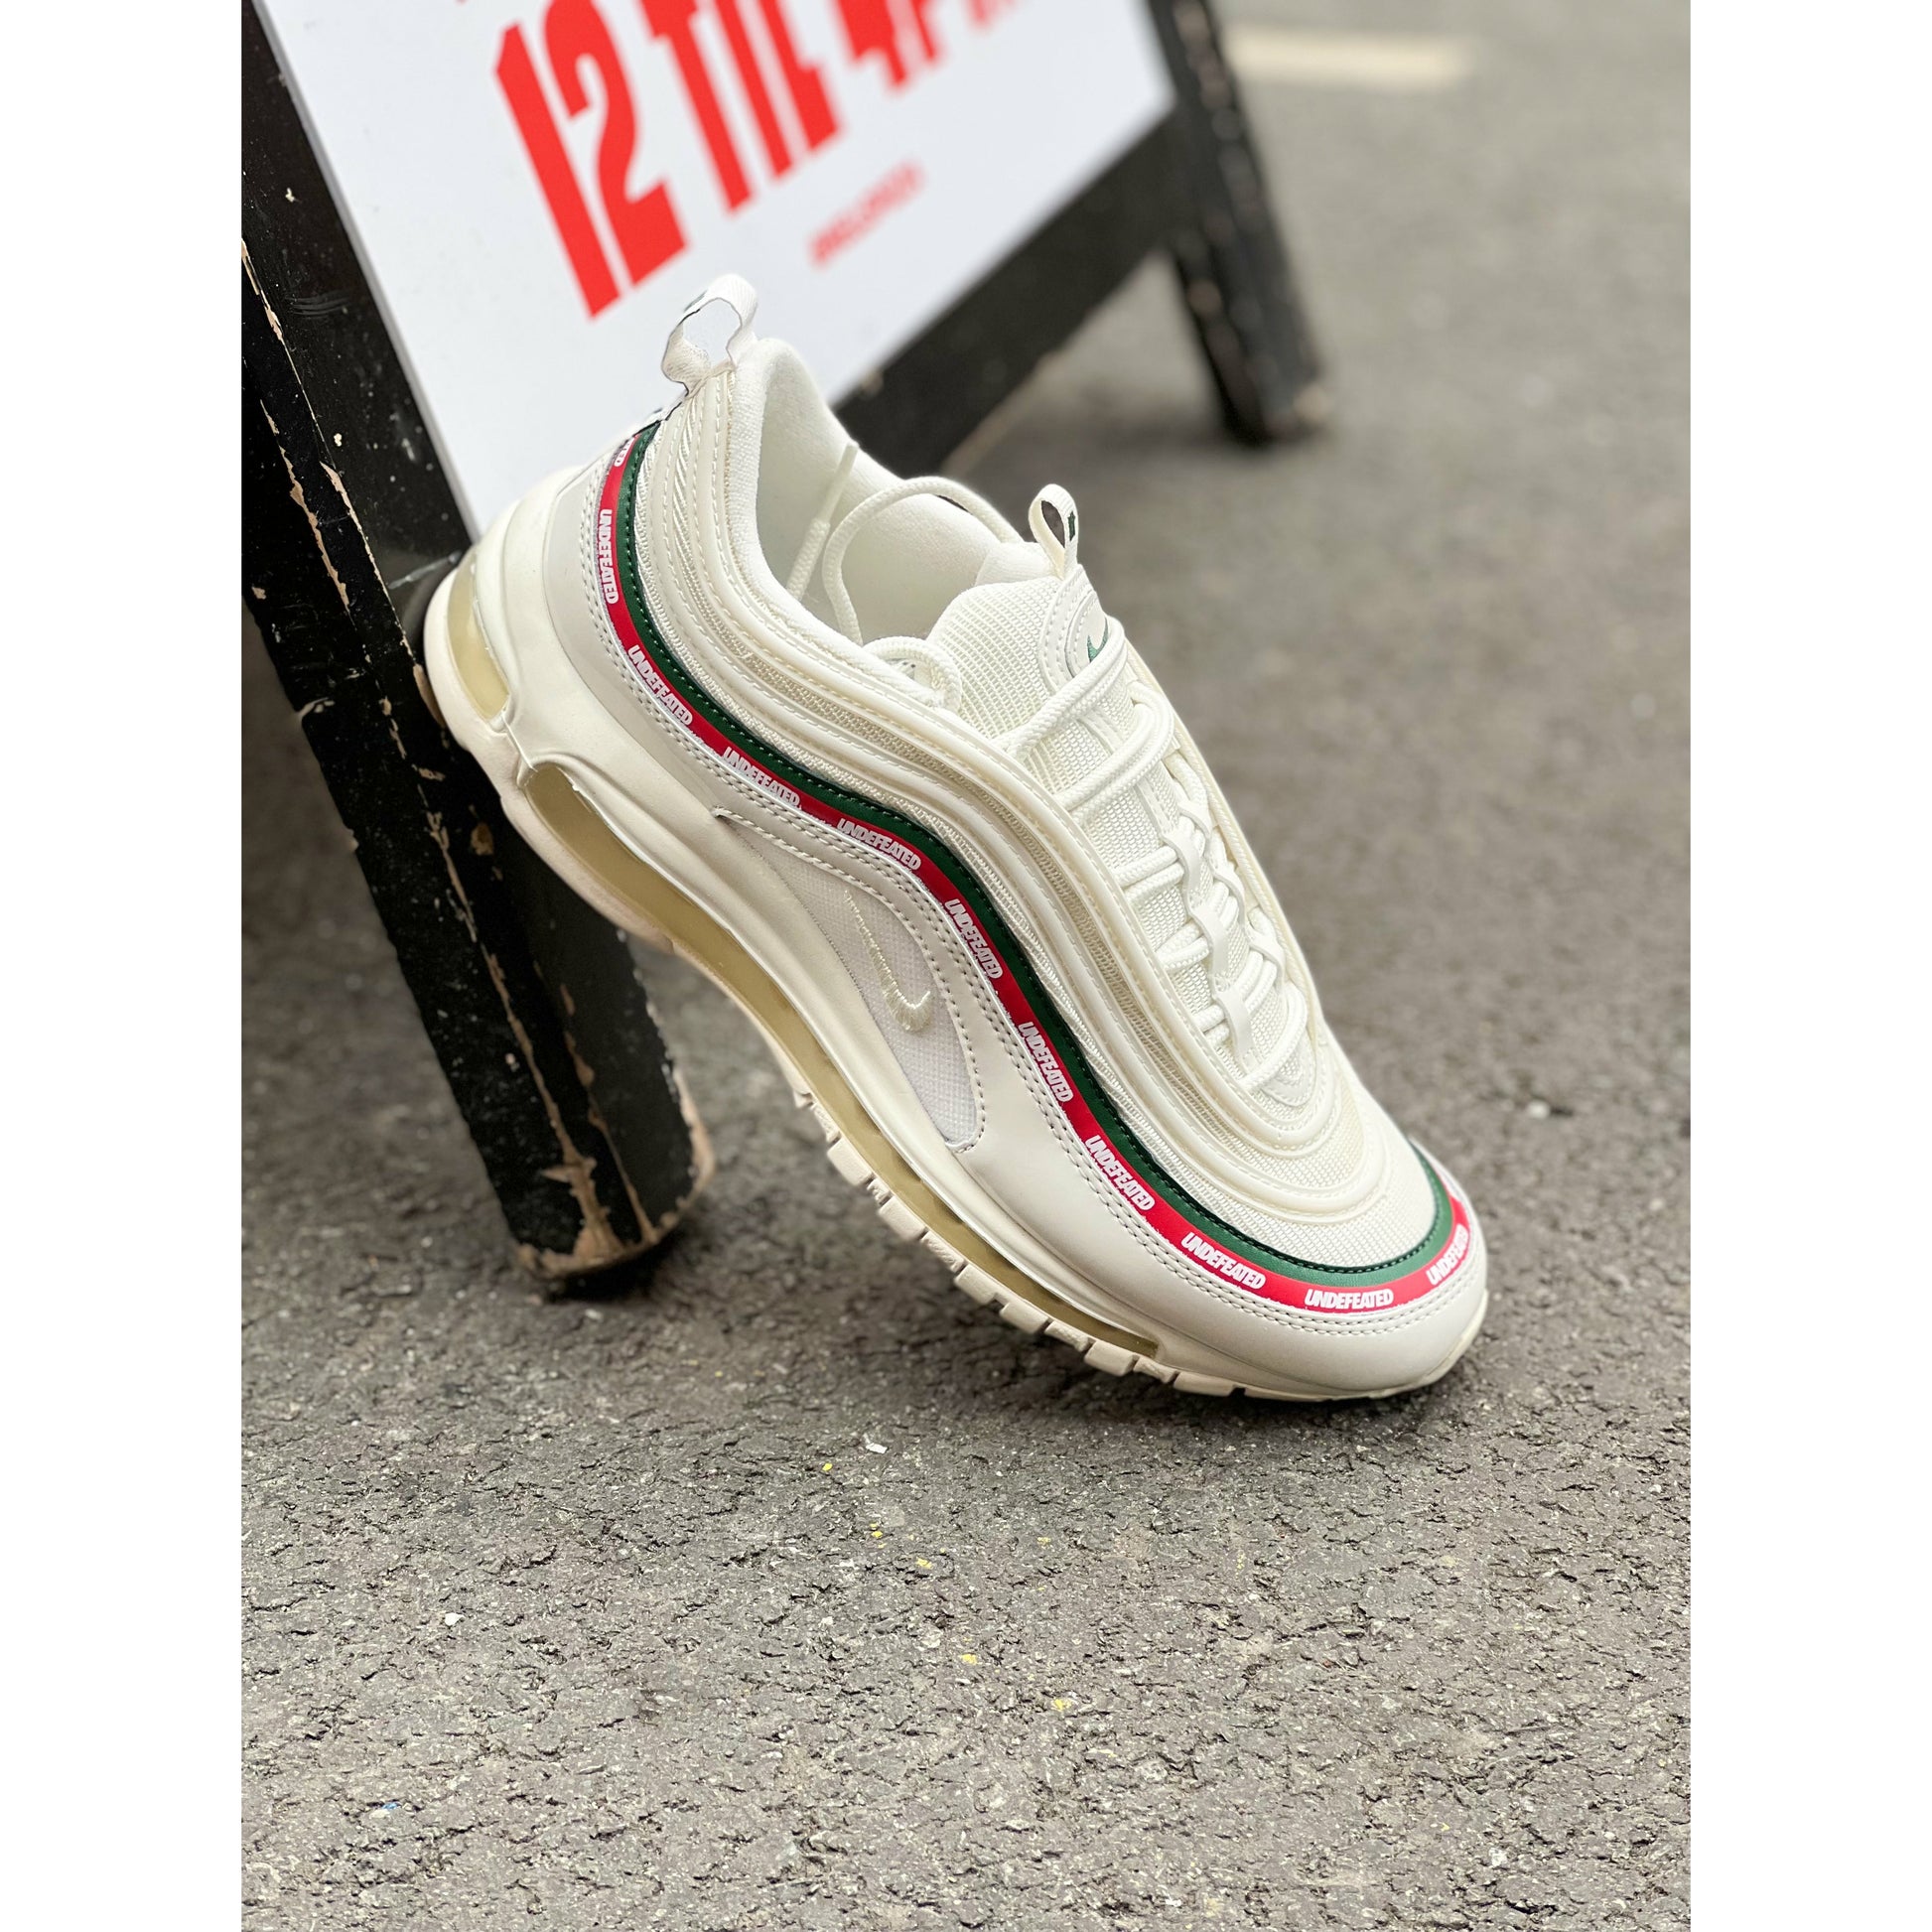 Nike Air Max 97 UNDFTD White by Nike from £550.00